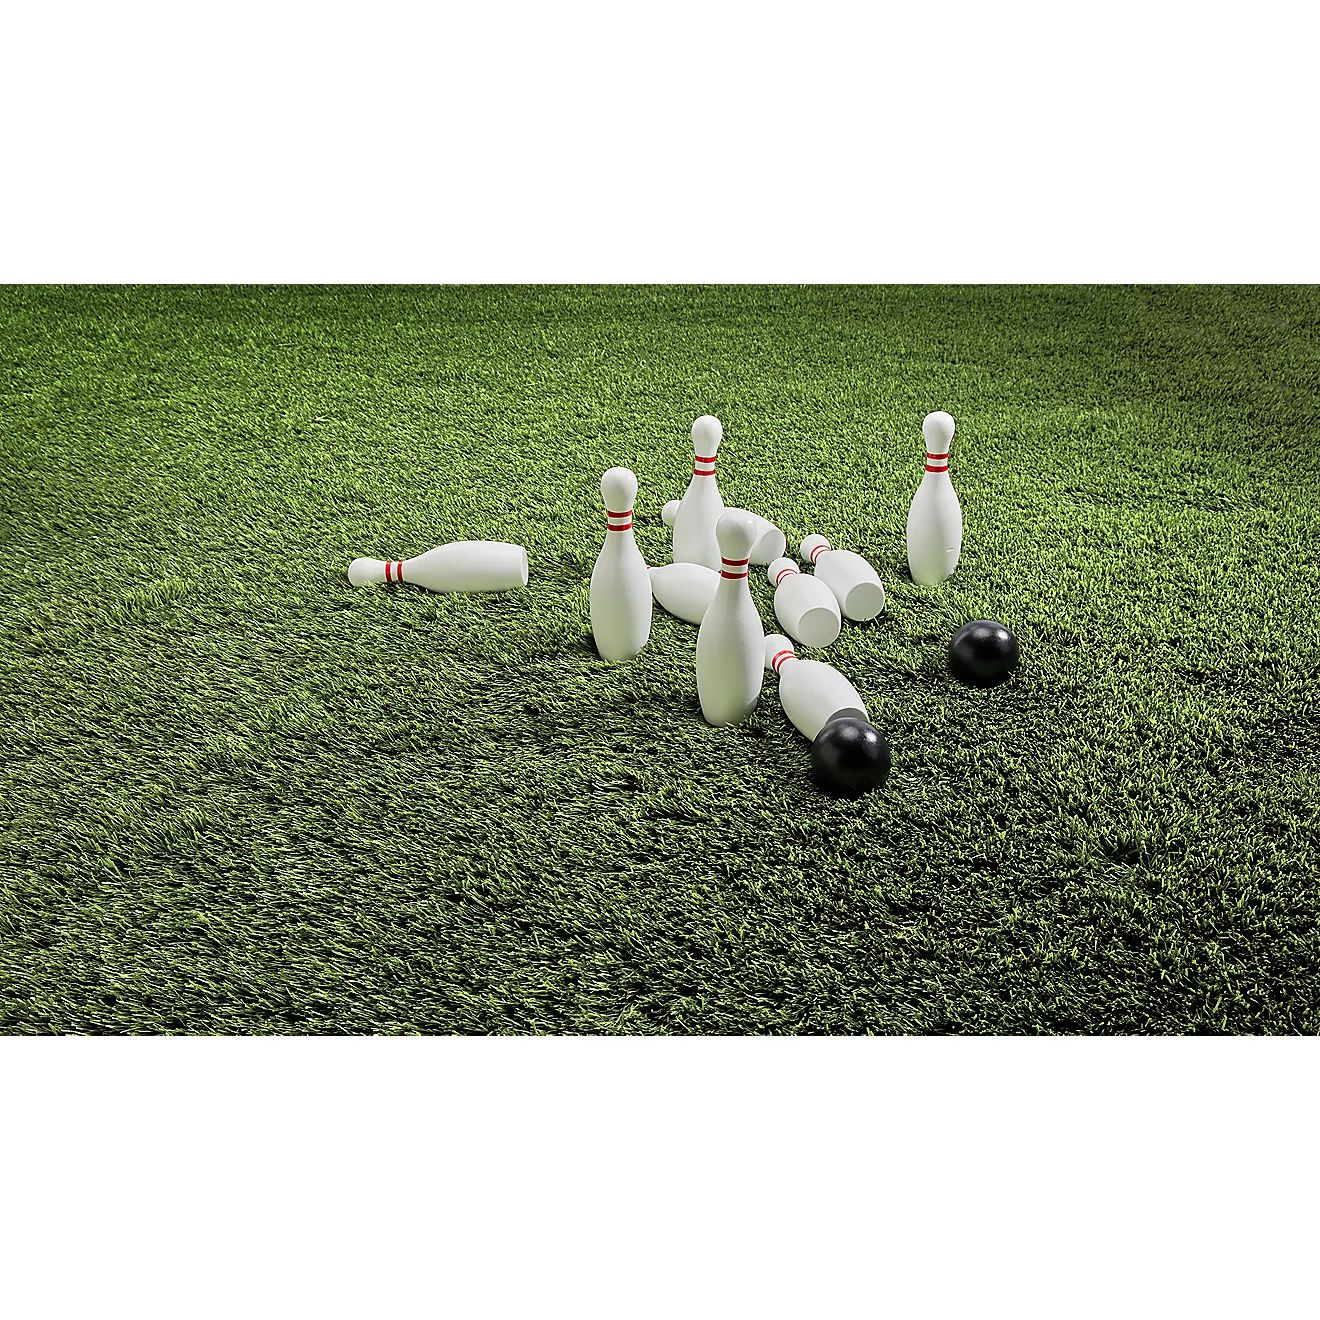 AGame Portable Lawn Bowling Set | Free Shipping at Academy | Academy Sports + Outdoors